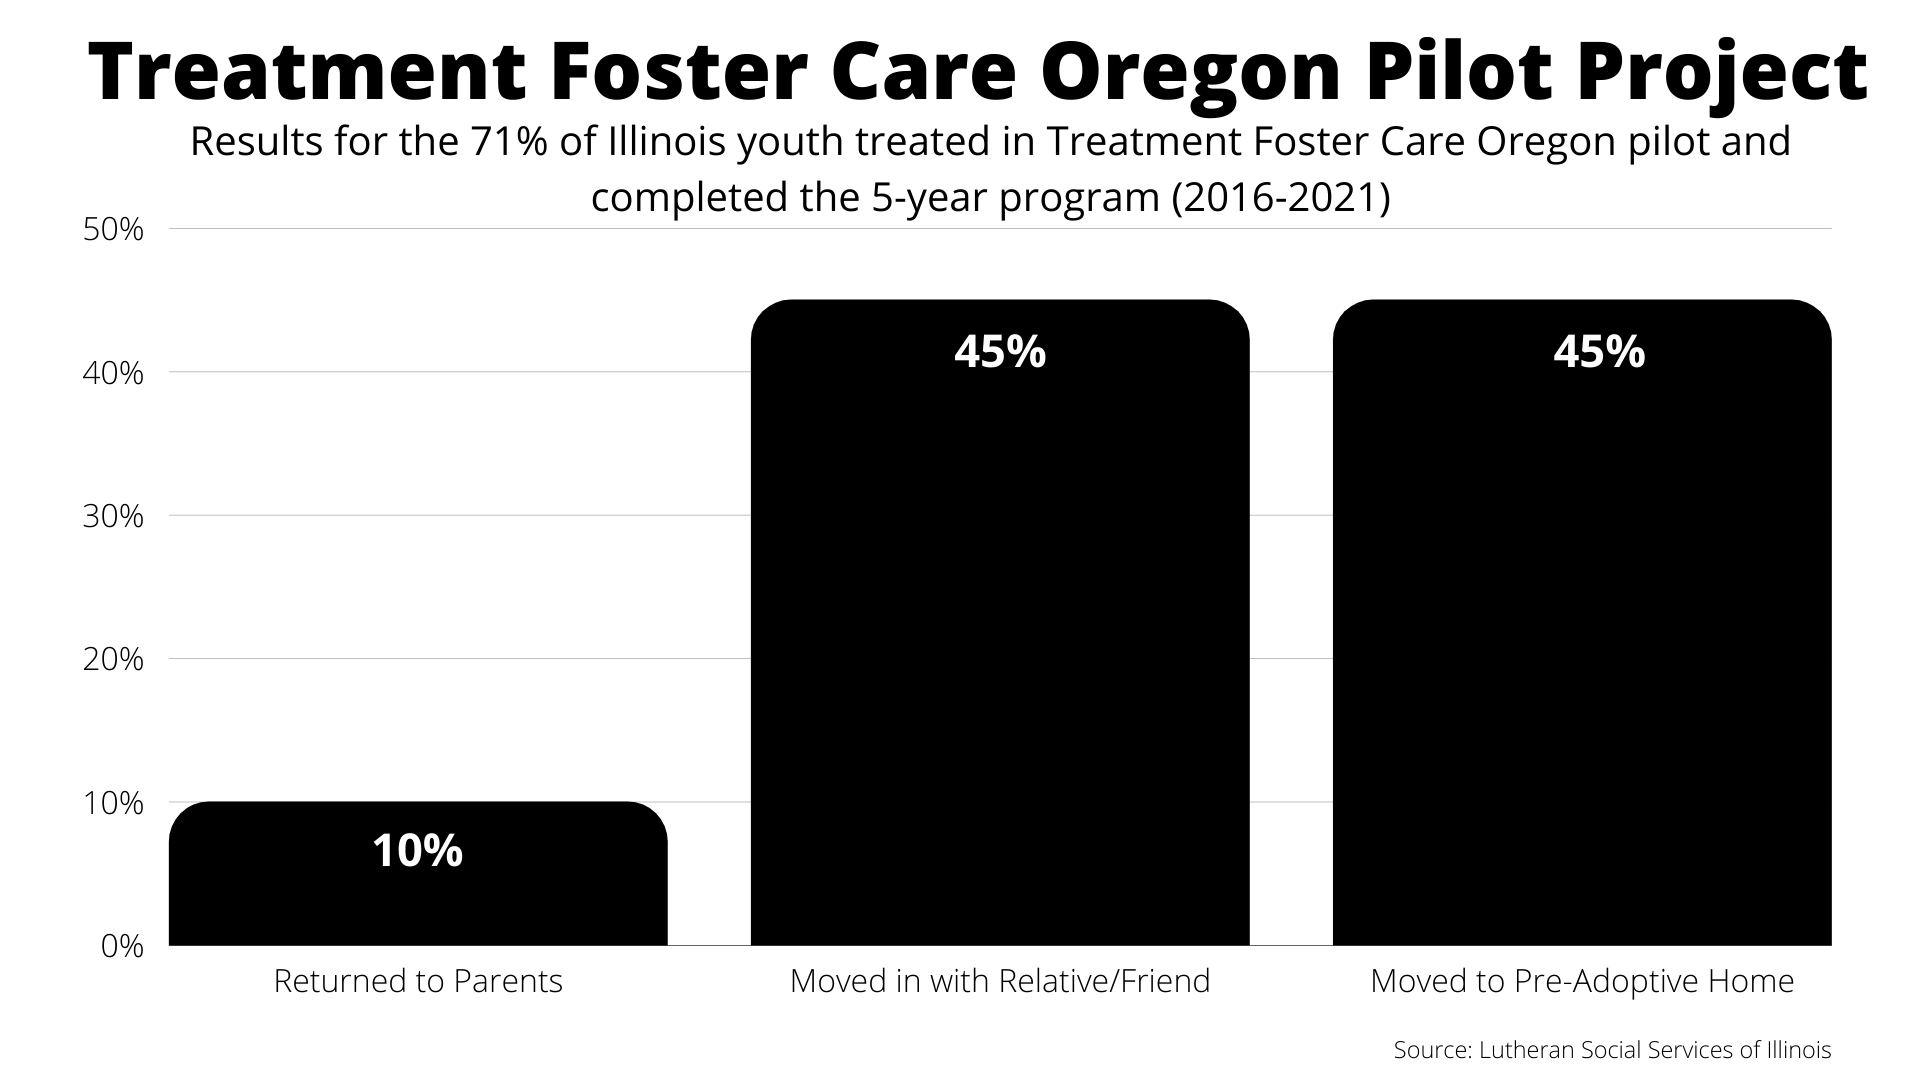 Bar graph showing the results for the 71% of Illinois youth treated in Treatment Foster Care Oregon pilot and completed the 5-year program.